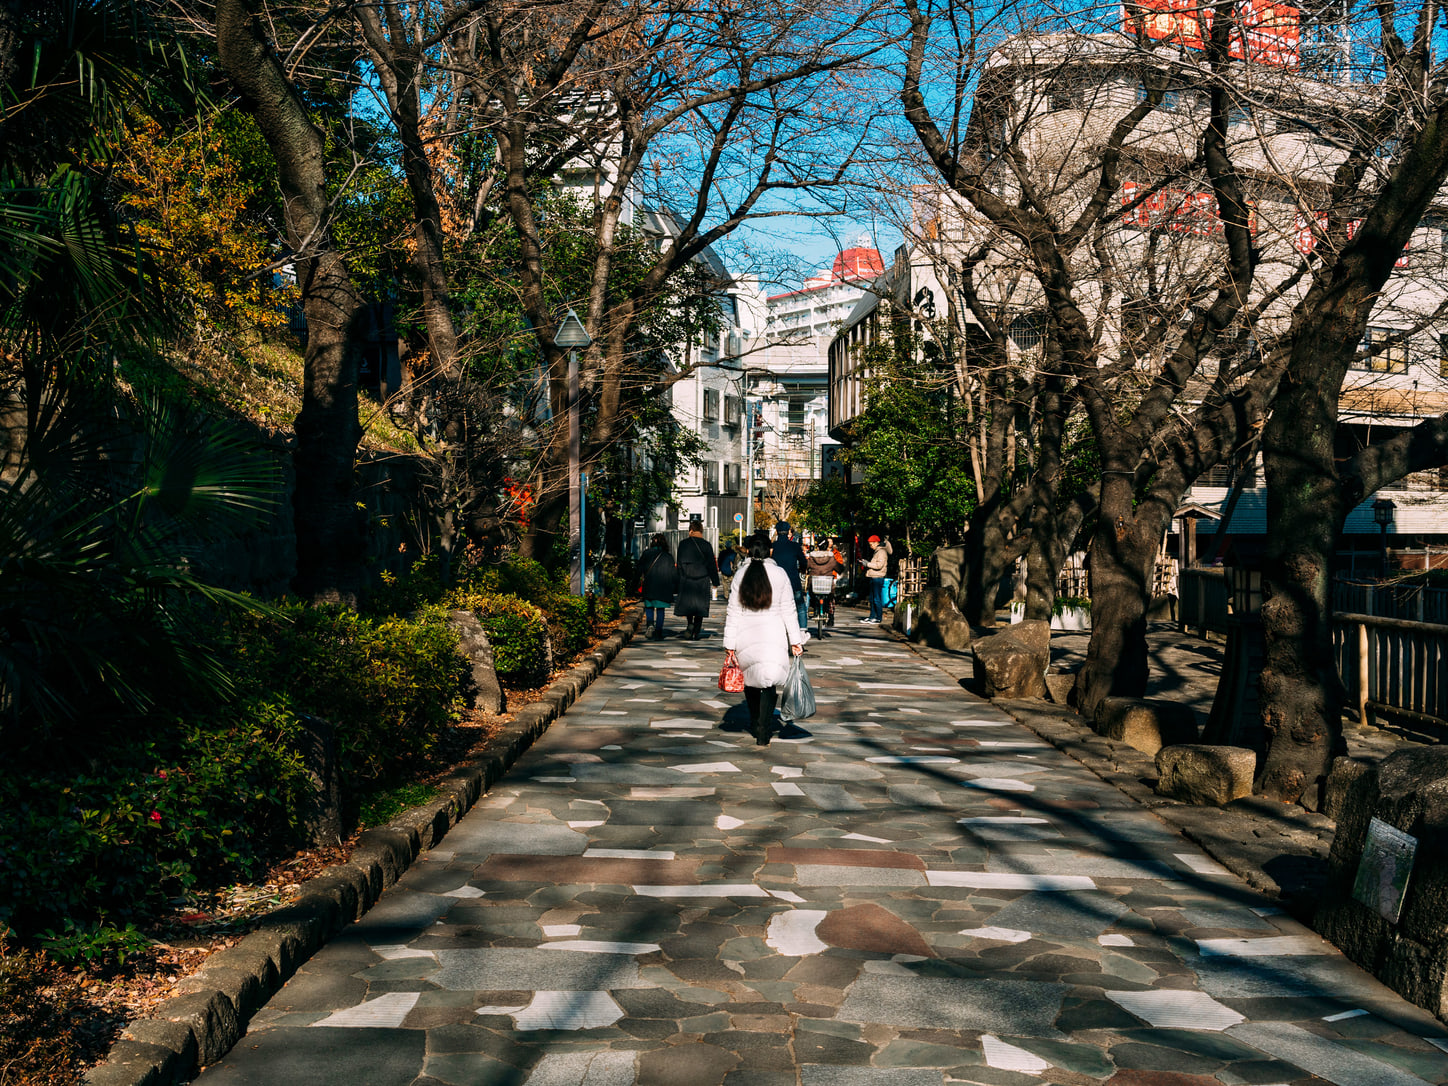 Take Things Slow in Oji: An Area Guide